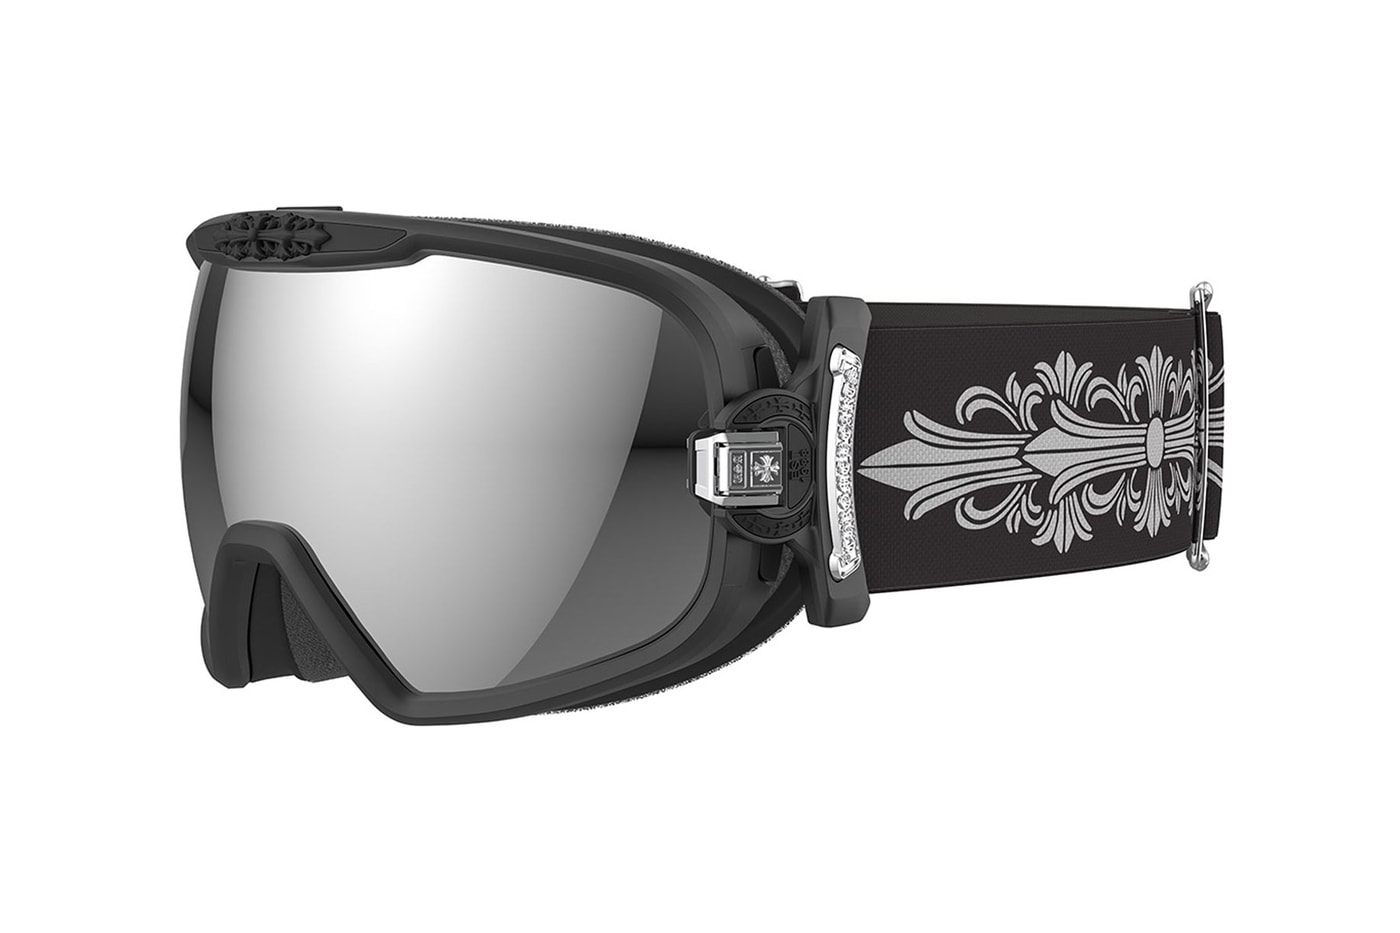 Chrome hearts snow goggles slopes carl zeiss frames  enhance contrast low light uv protection waterproof coating thermoplastic materials silcone rubber accents moisture wick foam black red white slime greensilver 1550 USD release info